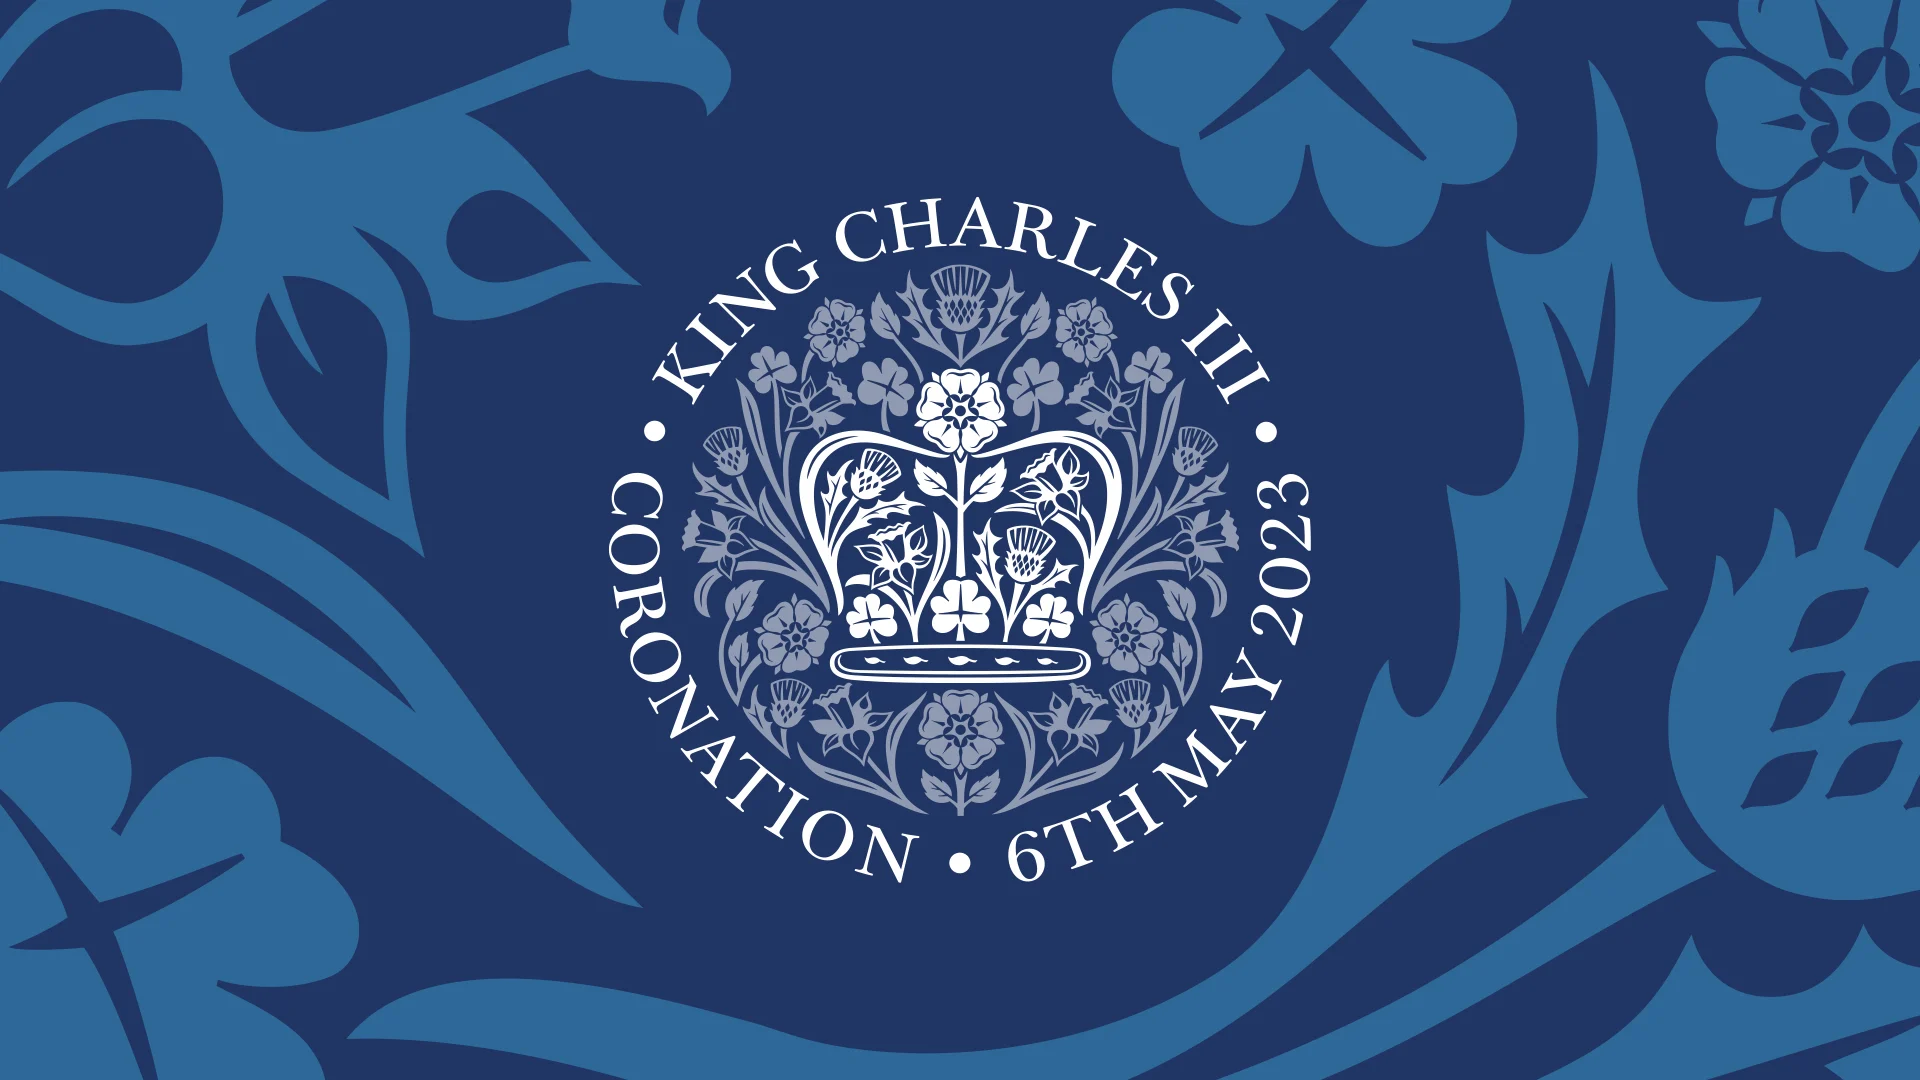 A white crown design on a blue patterned background, for the Coronation of King Charles III, 6th May 2023